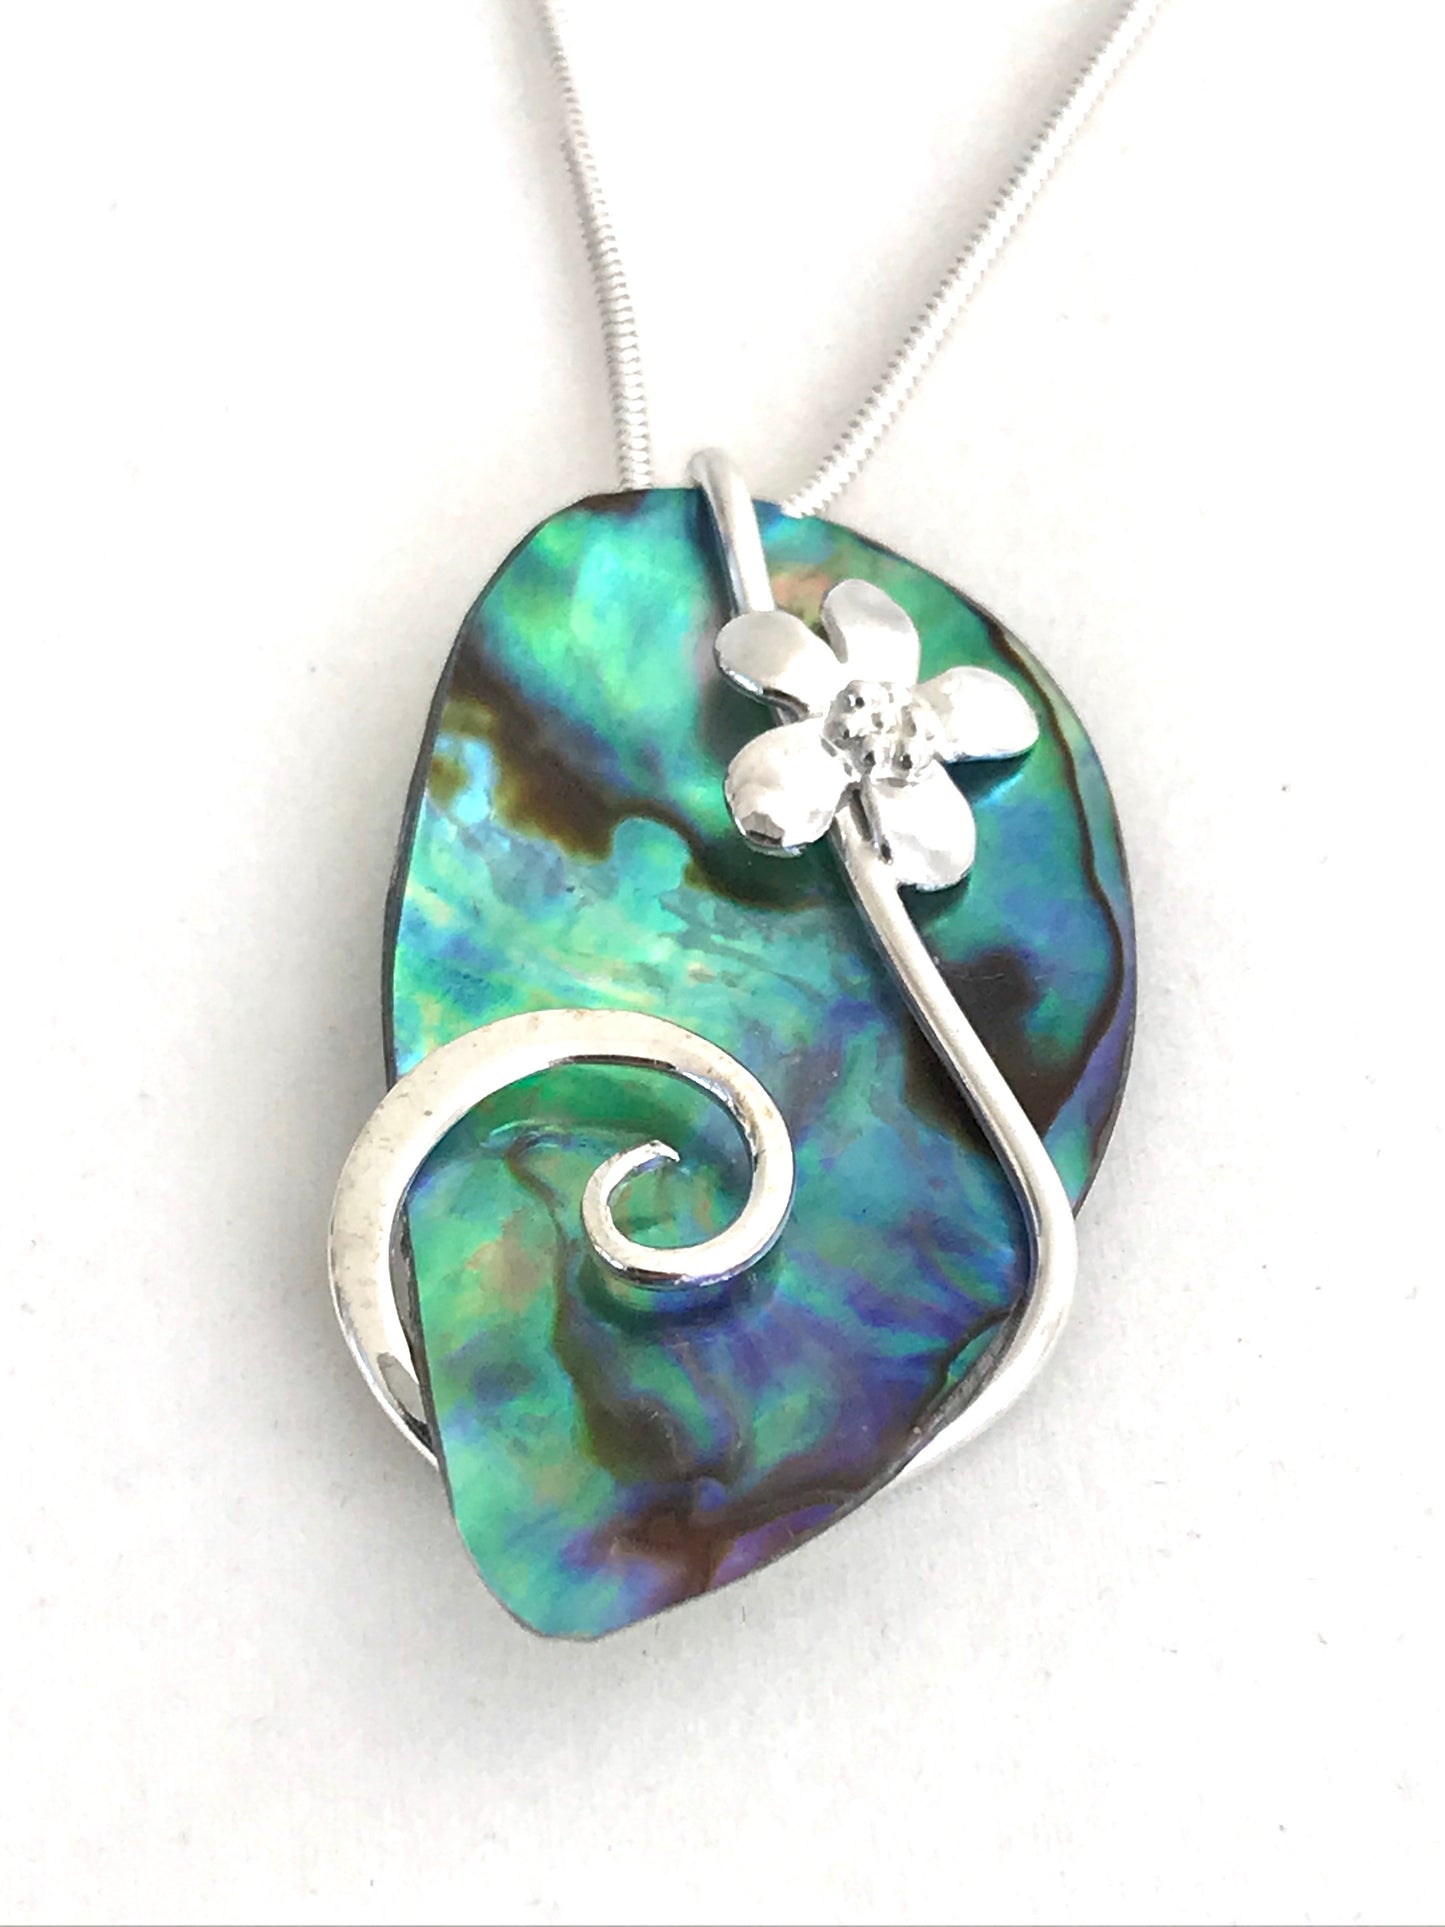 Abalone shell necklace with flower